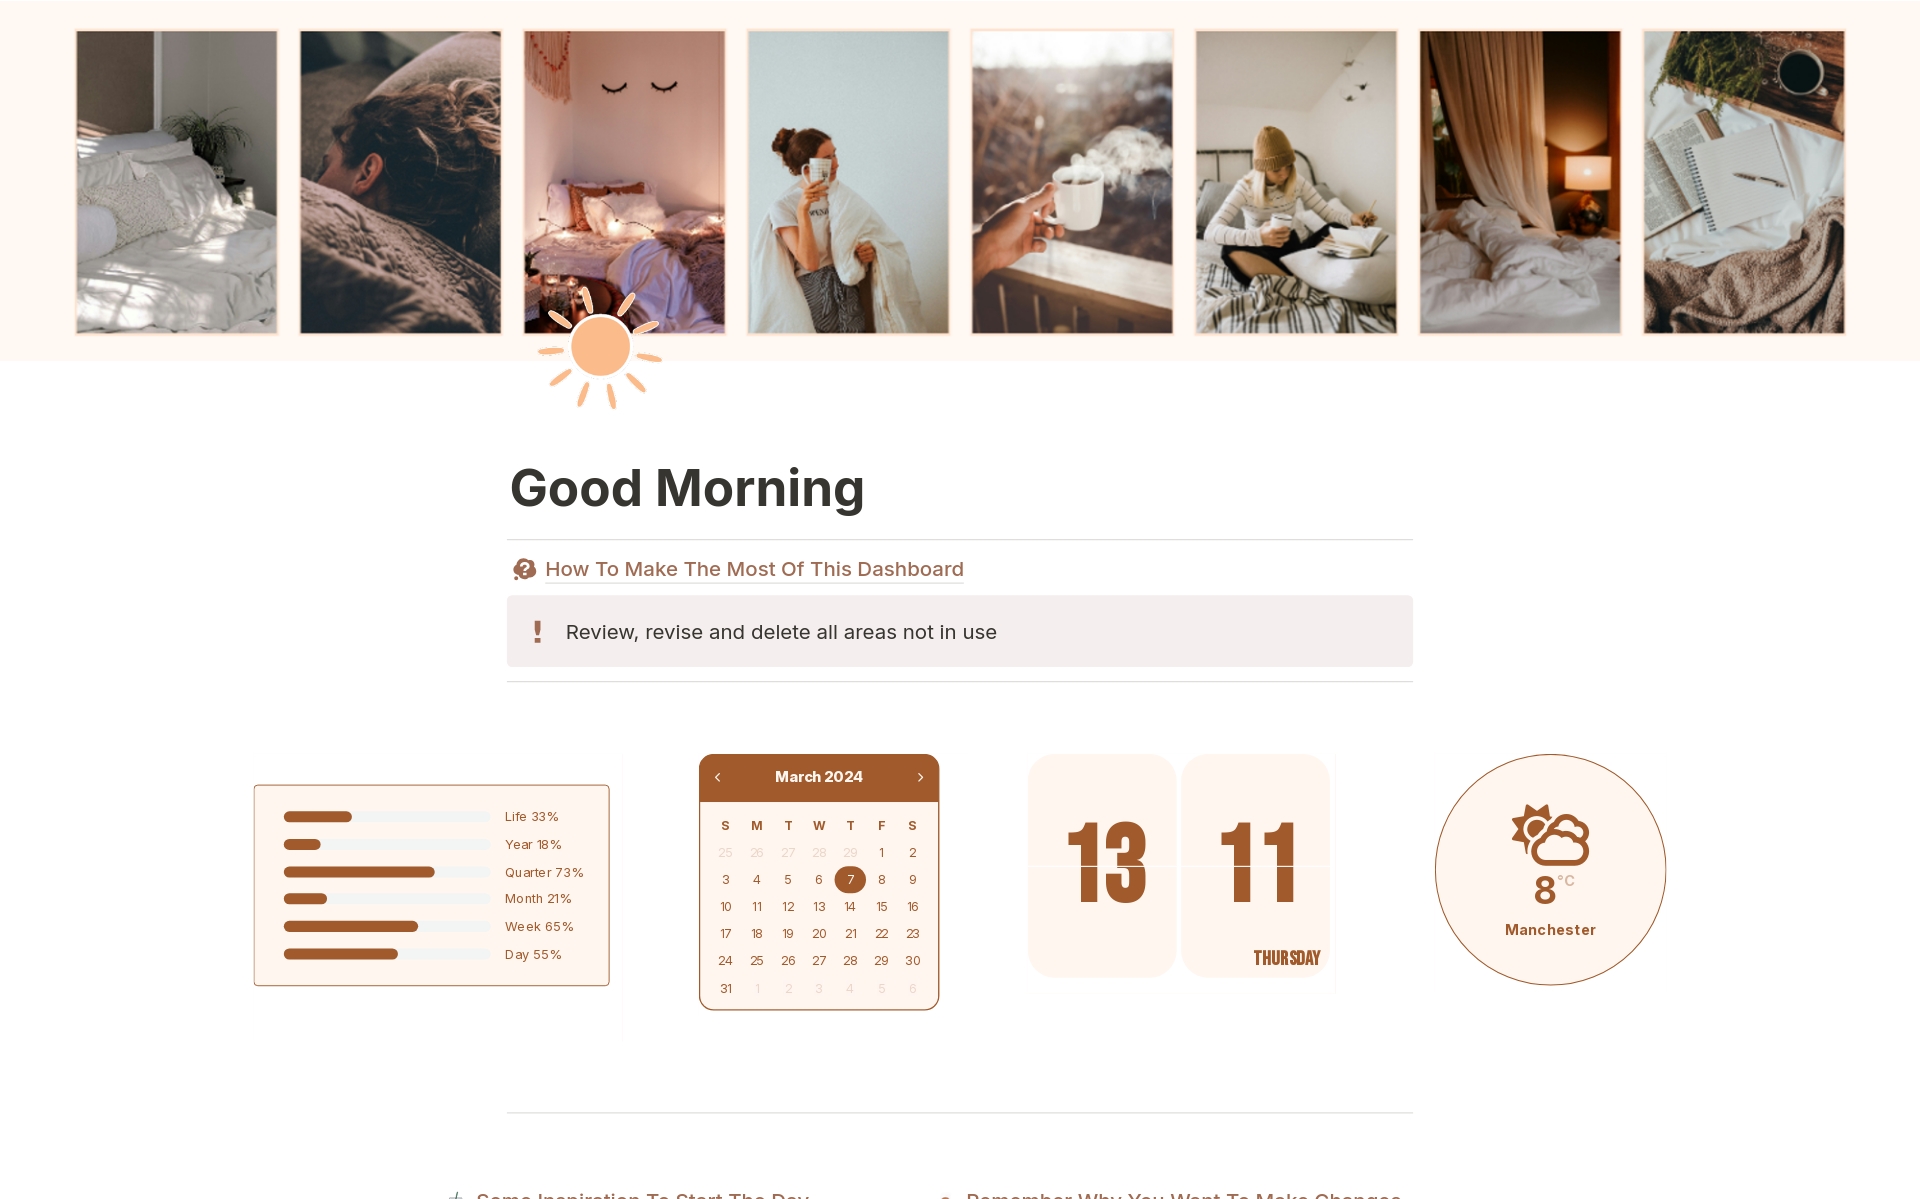 Stay on track with your morning routine using this Notion dashboard! It helps you organise tasks, plan your day, and build productive habits for a successful start.